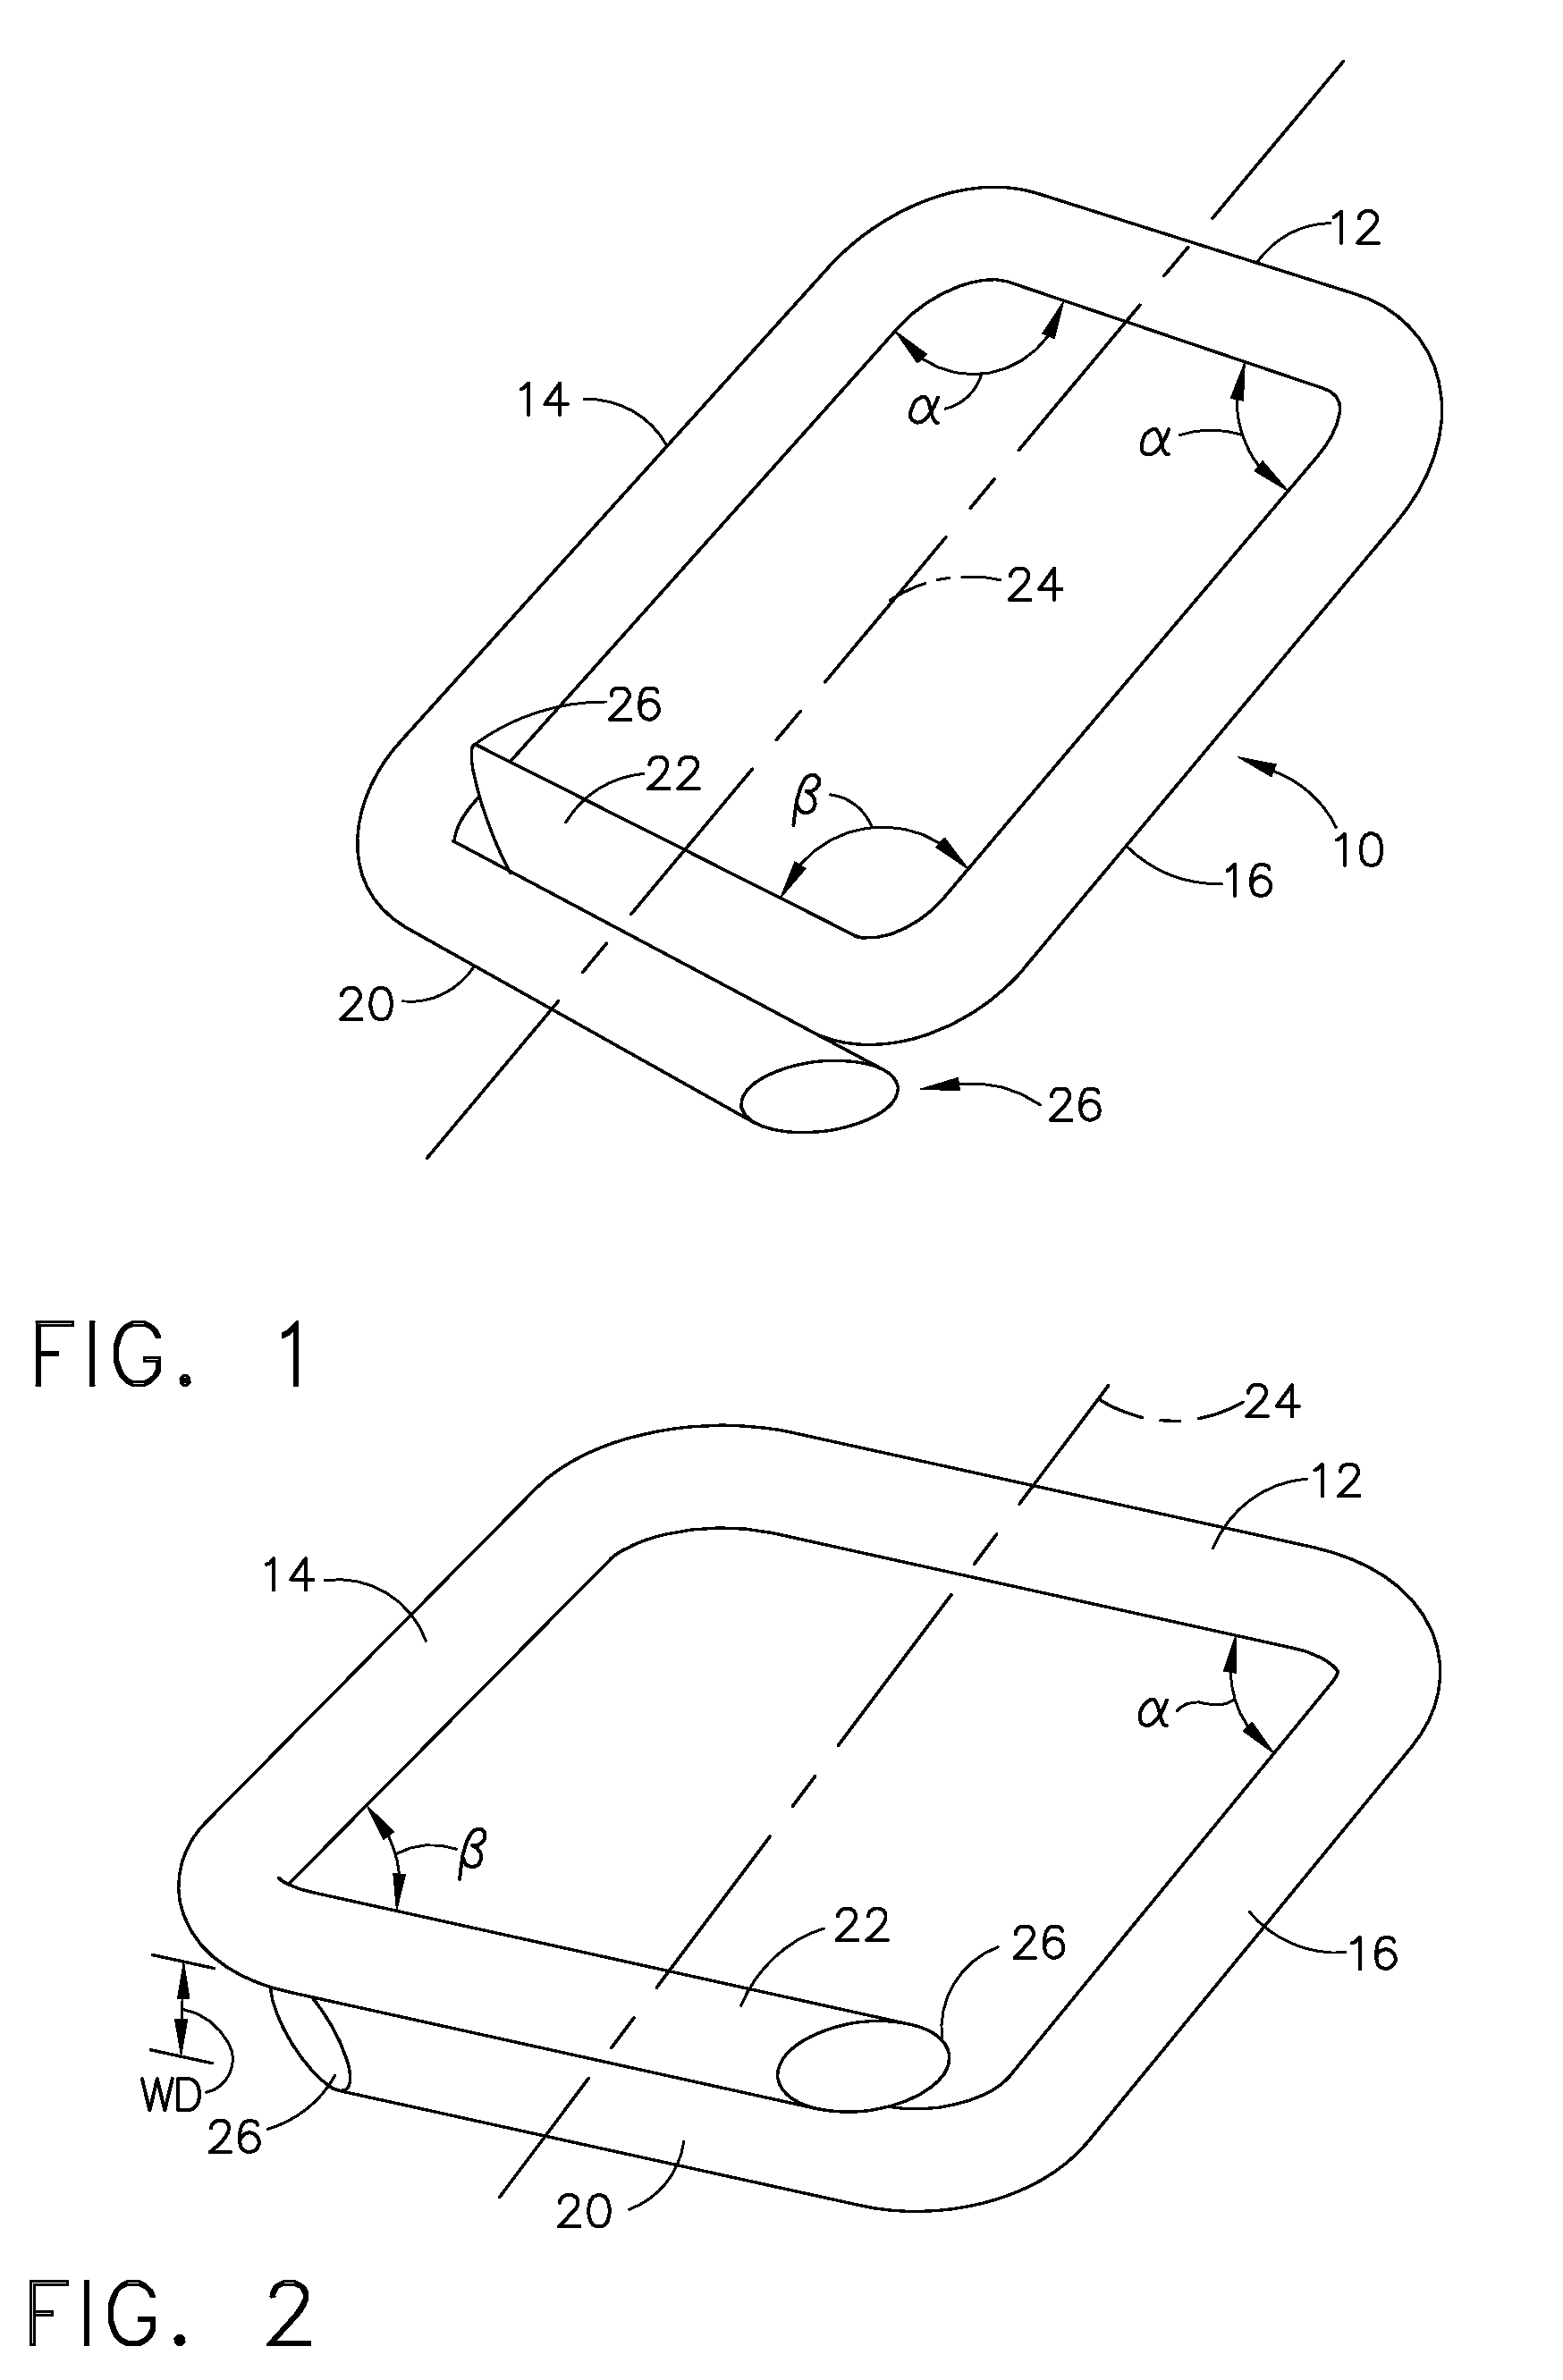 Surgical stapler for applying a large staple though a small delivery port and a method of using the stapler to secure a tissue fold